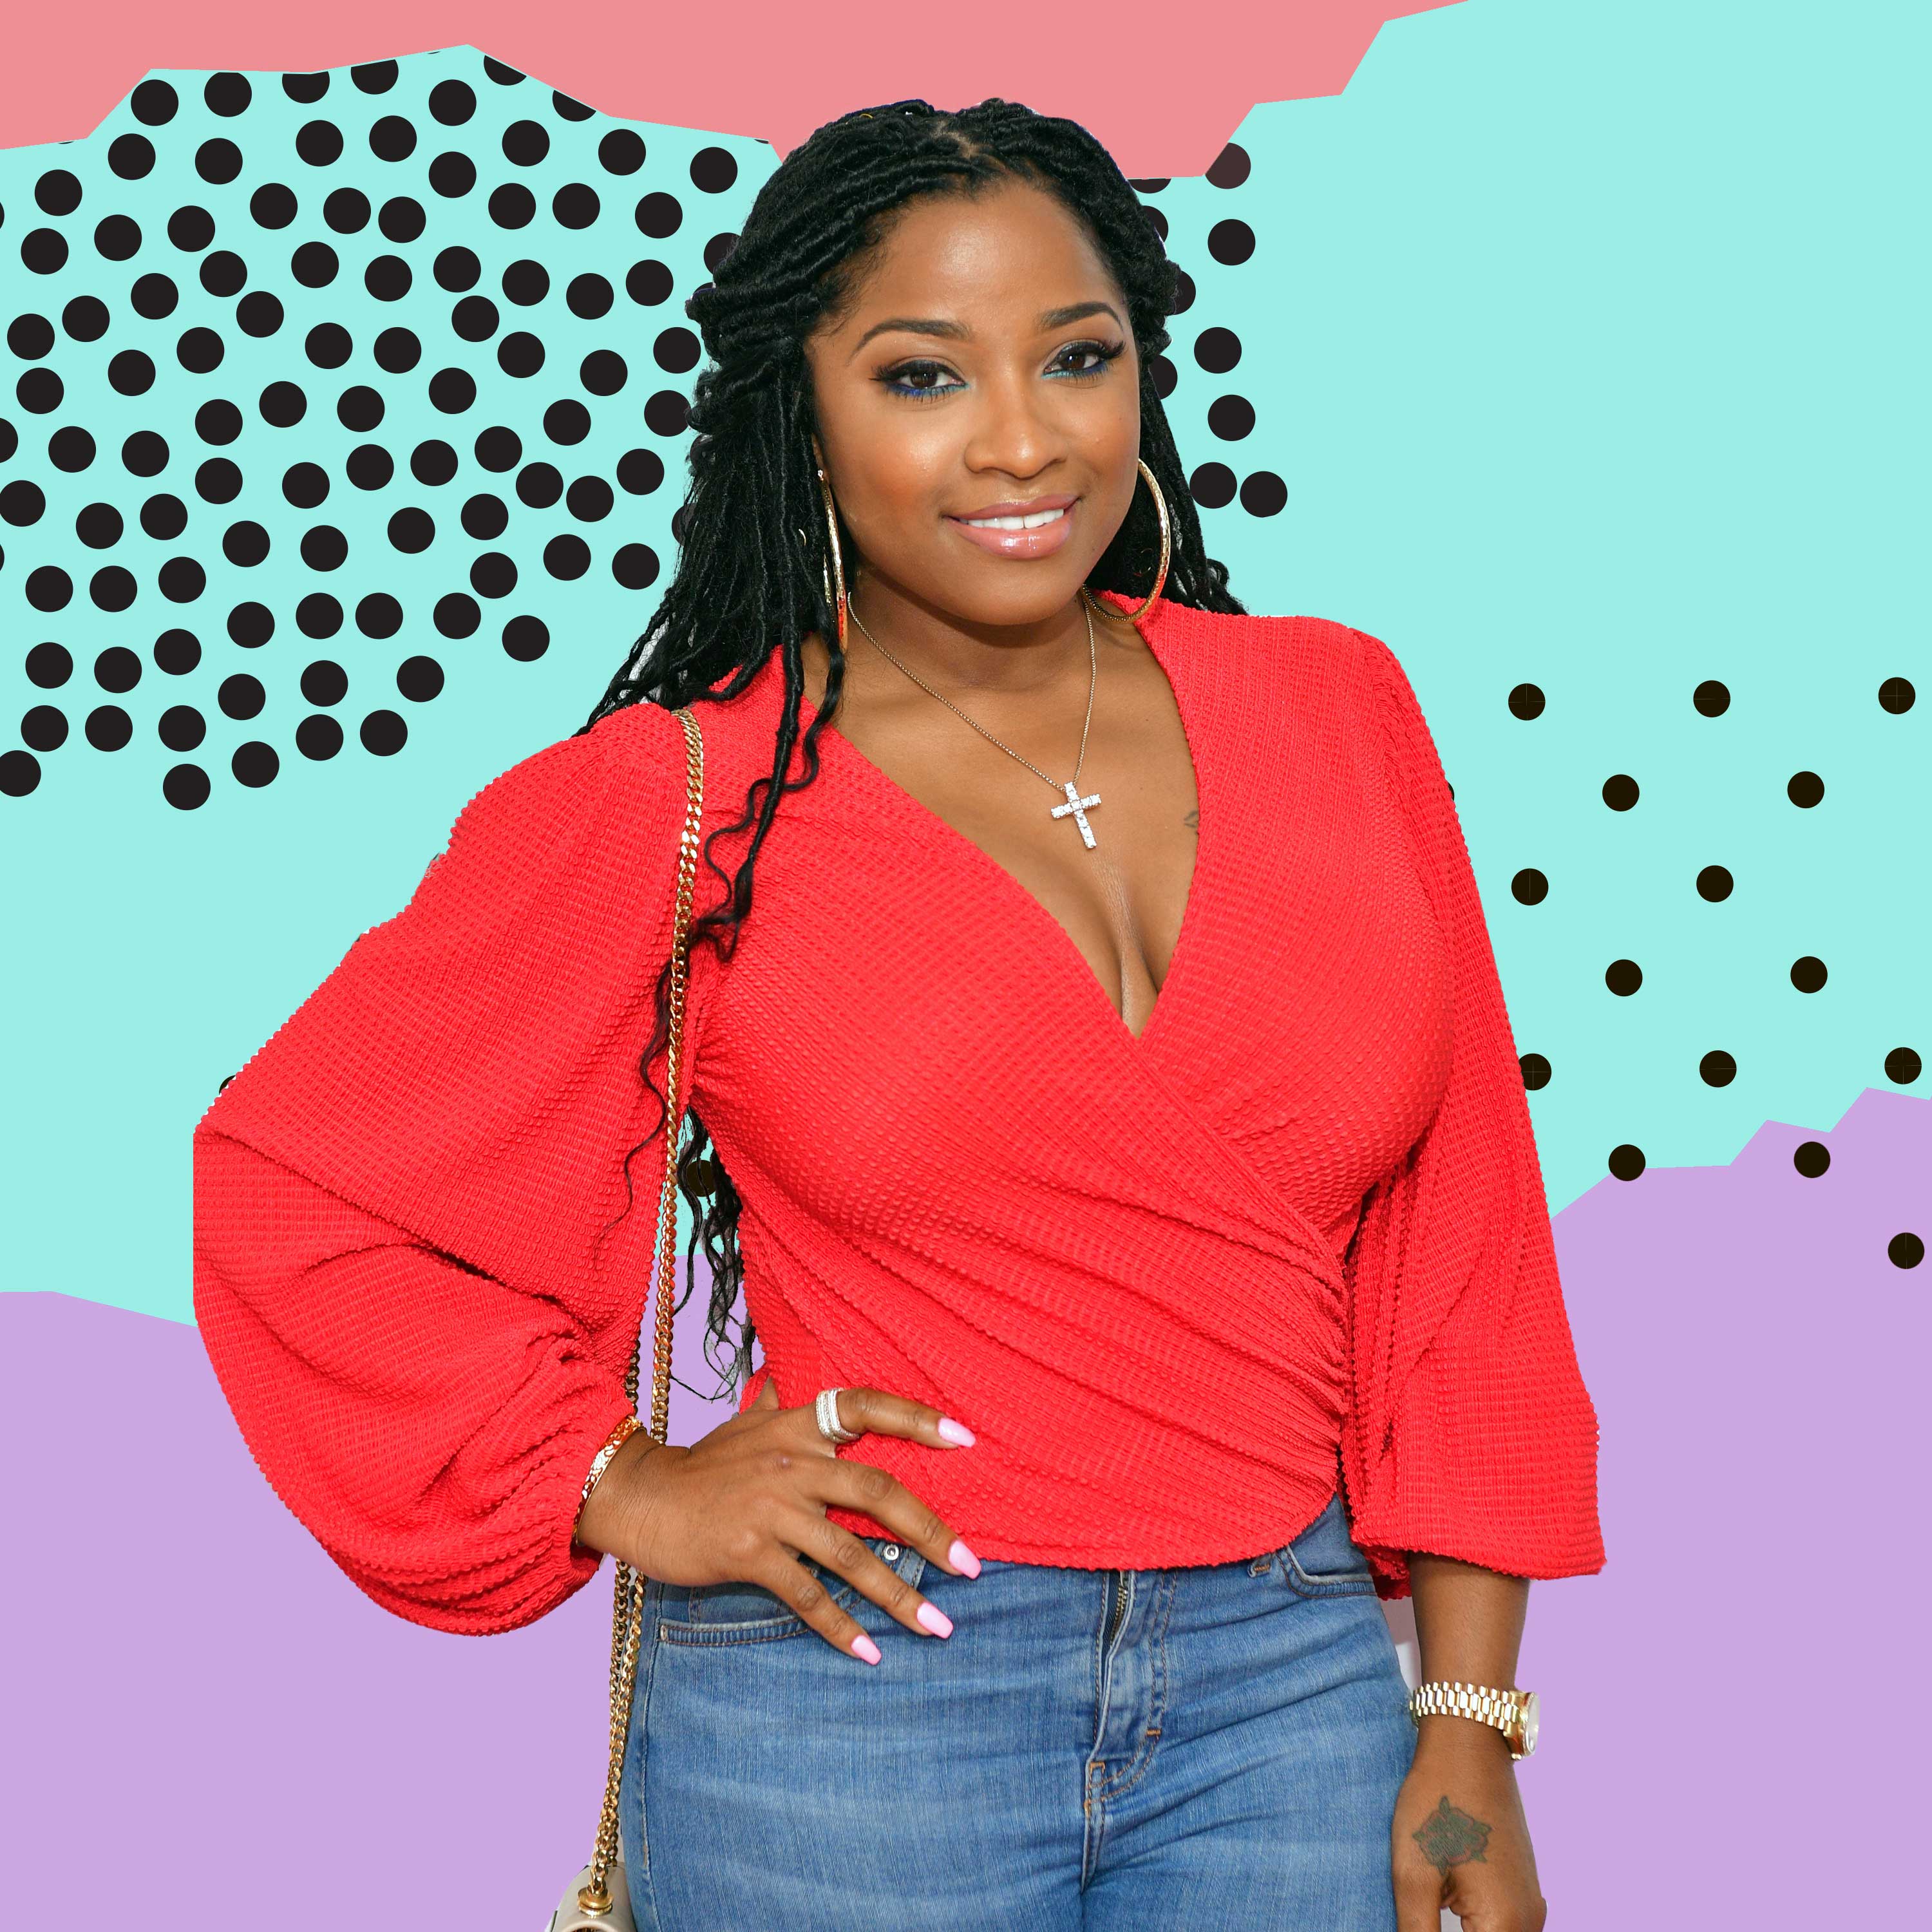 Toya Wright Gets Real About Losing Her Hair Due To Postpartum Alopecia